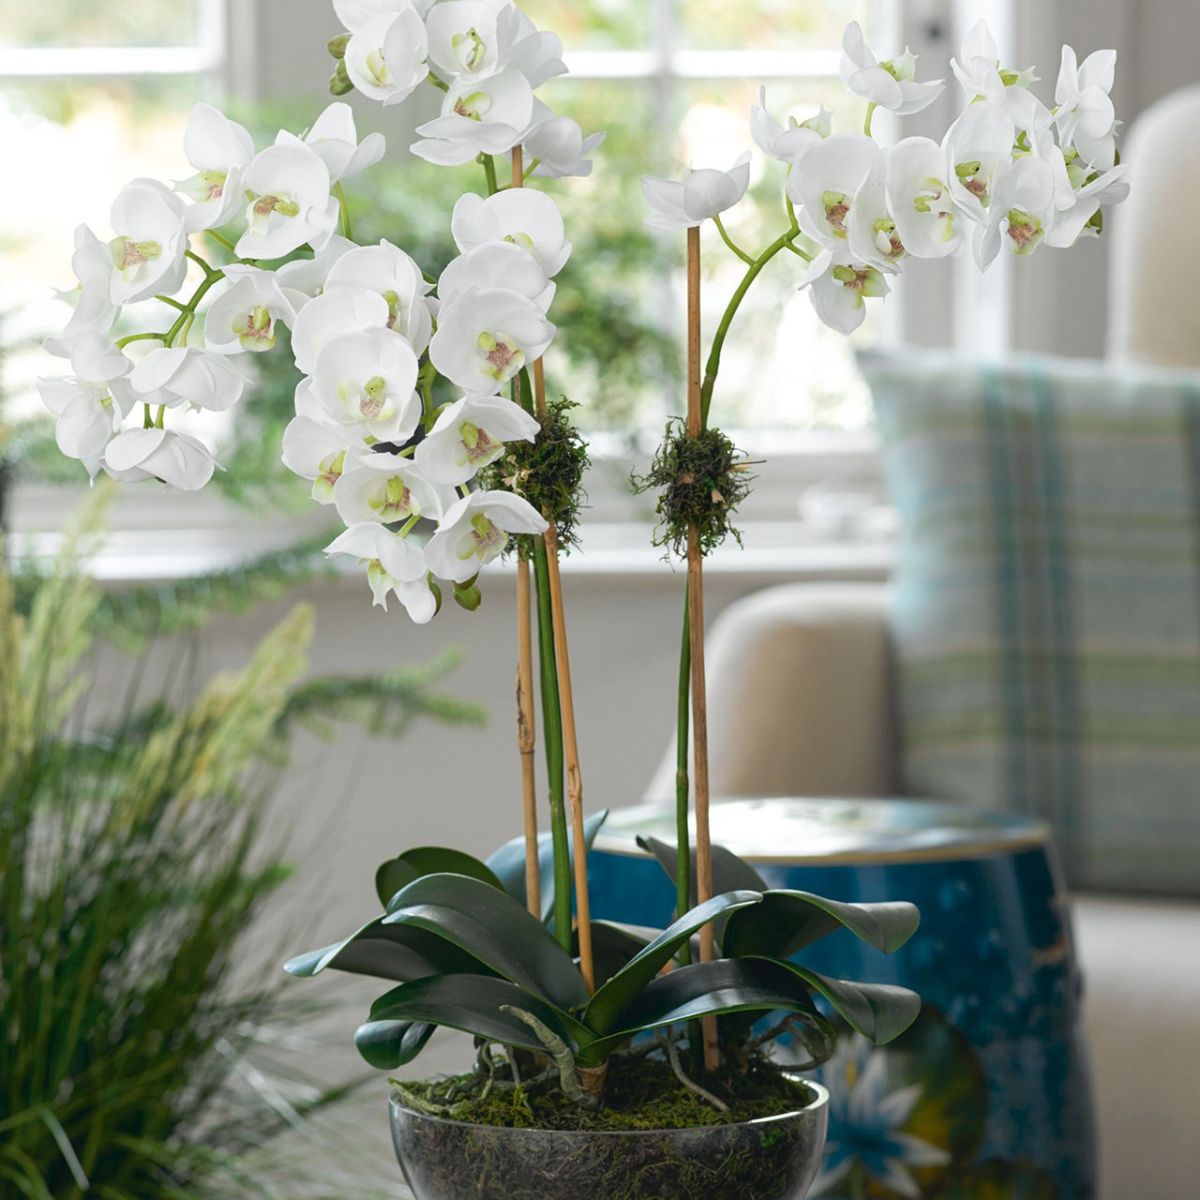 Orchids are one of the most delicate gifts to give